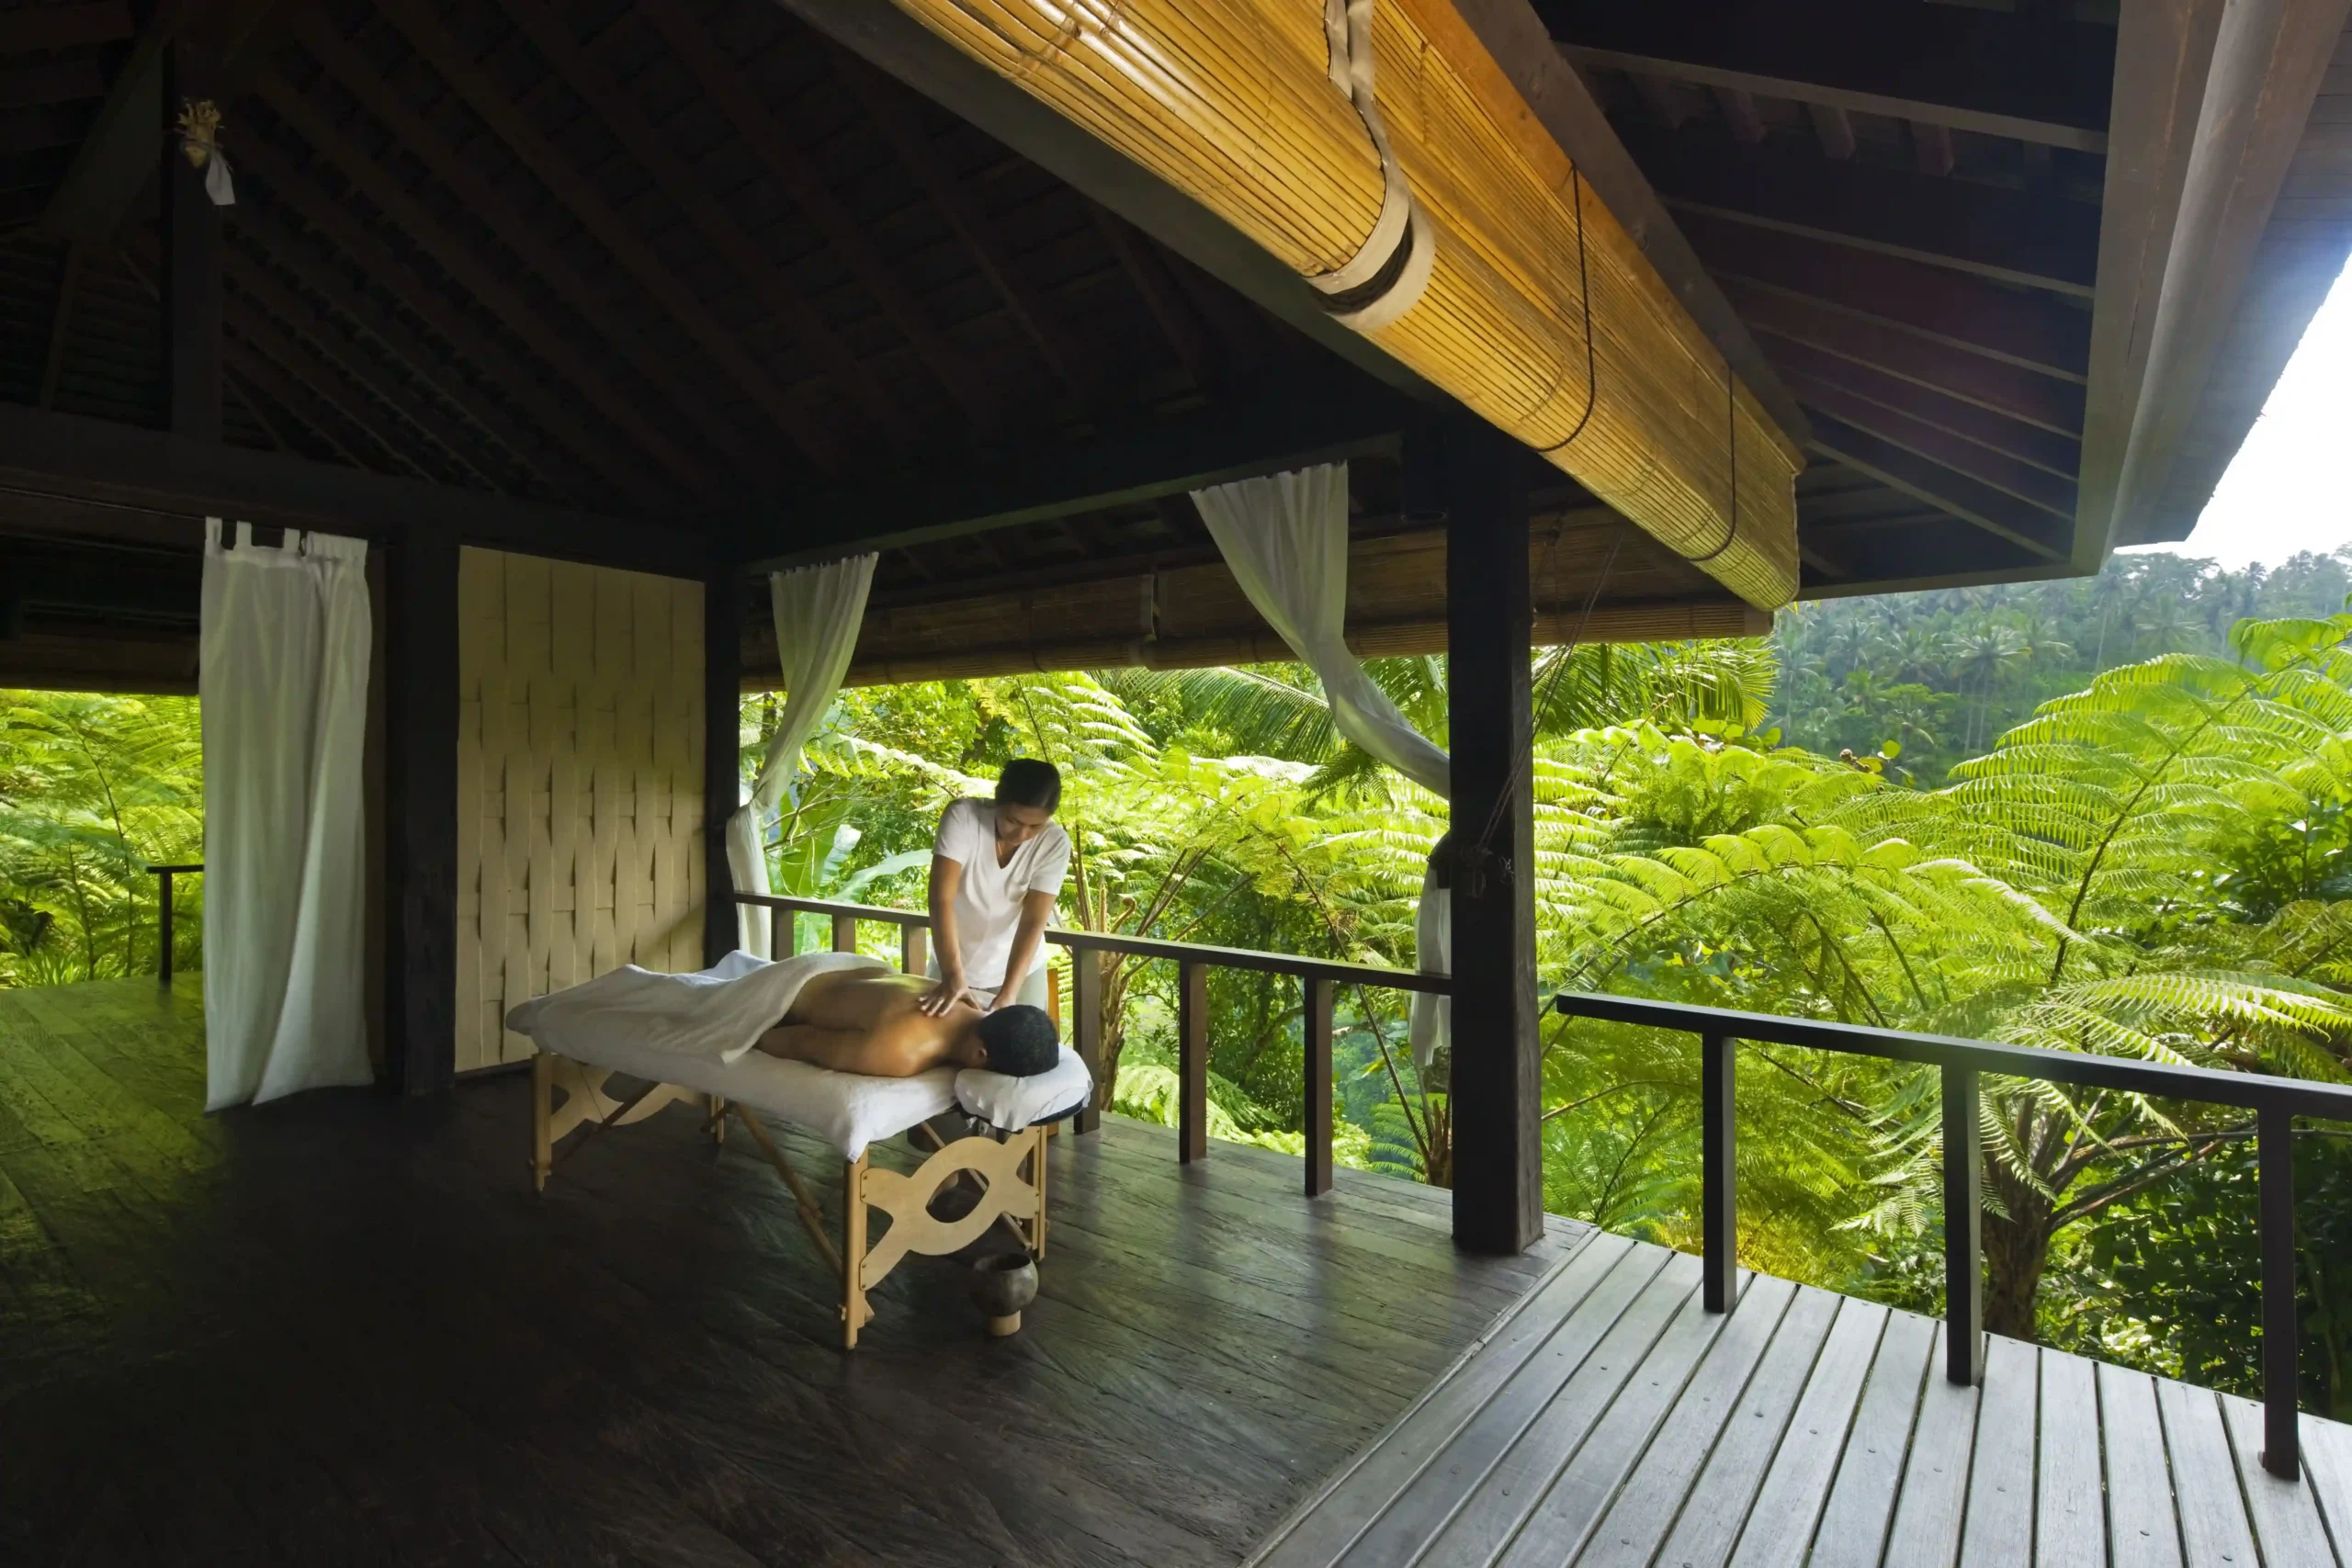 A therapeutic massage session at a wellness resort in Bali, conducted on a covered balcony set against a backdrop of lush tropical vegetation.